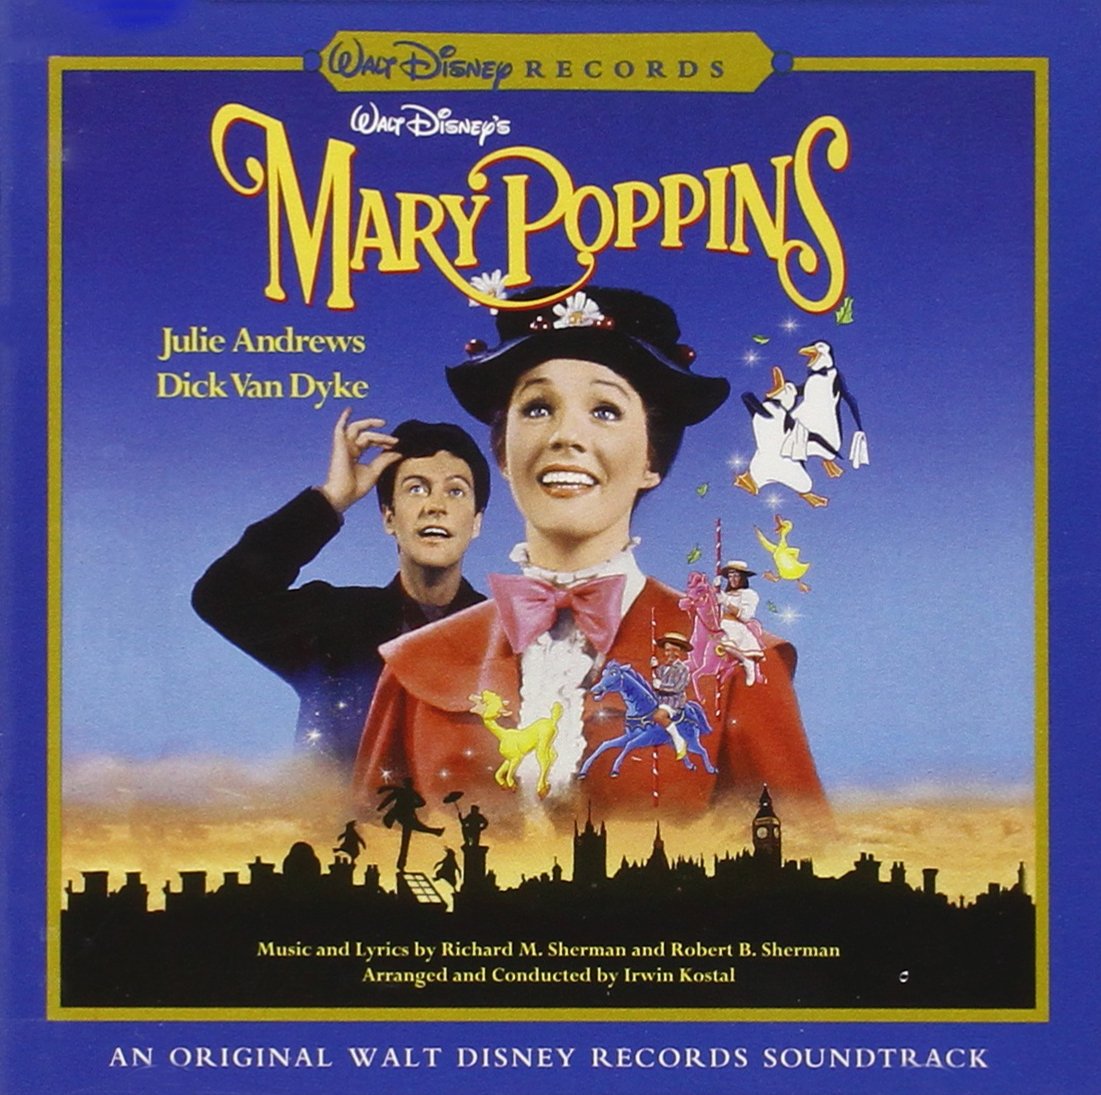 Mary Poppins (Original Motion Picture Soundtrack) is the soundtrack album o...